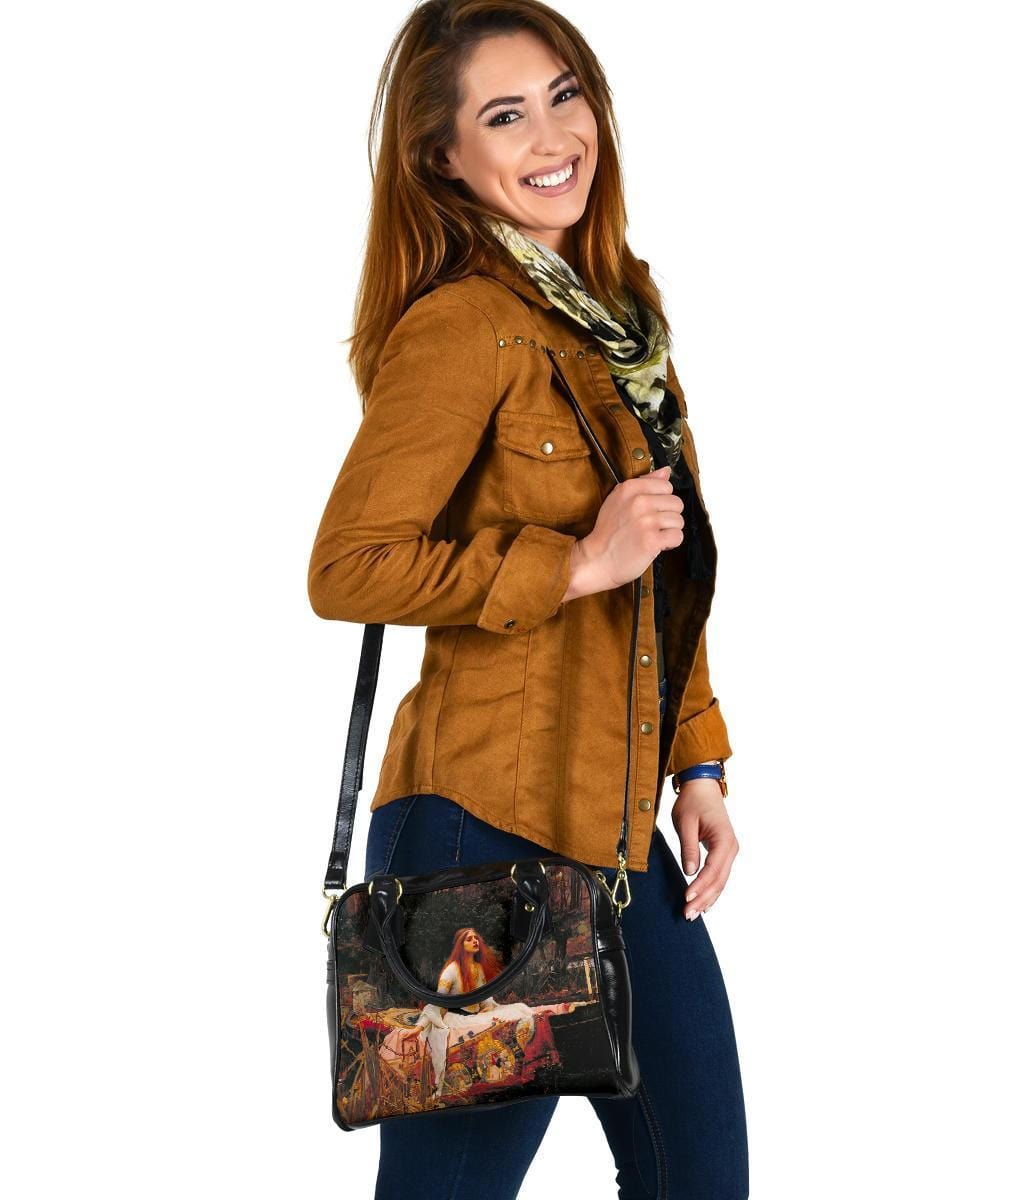 smiling woman with her new Lady of Shalott handbag